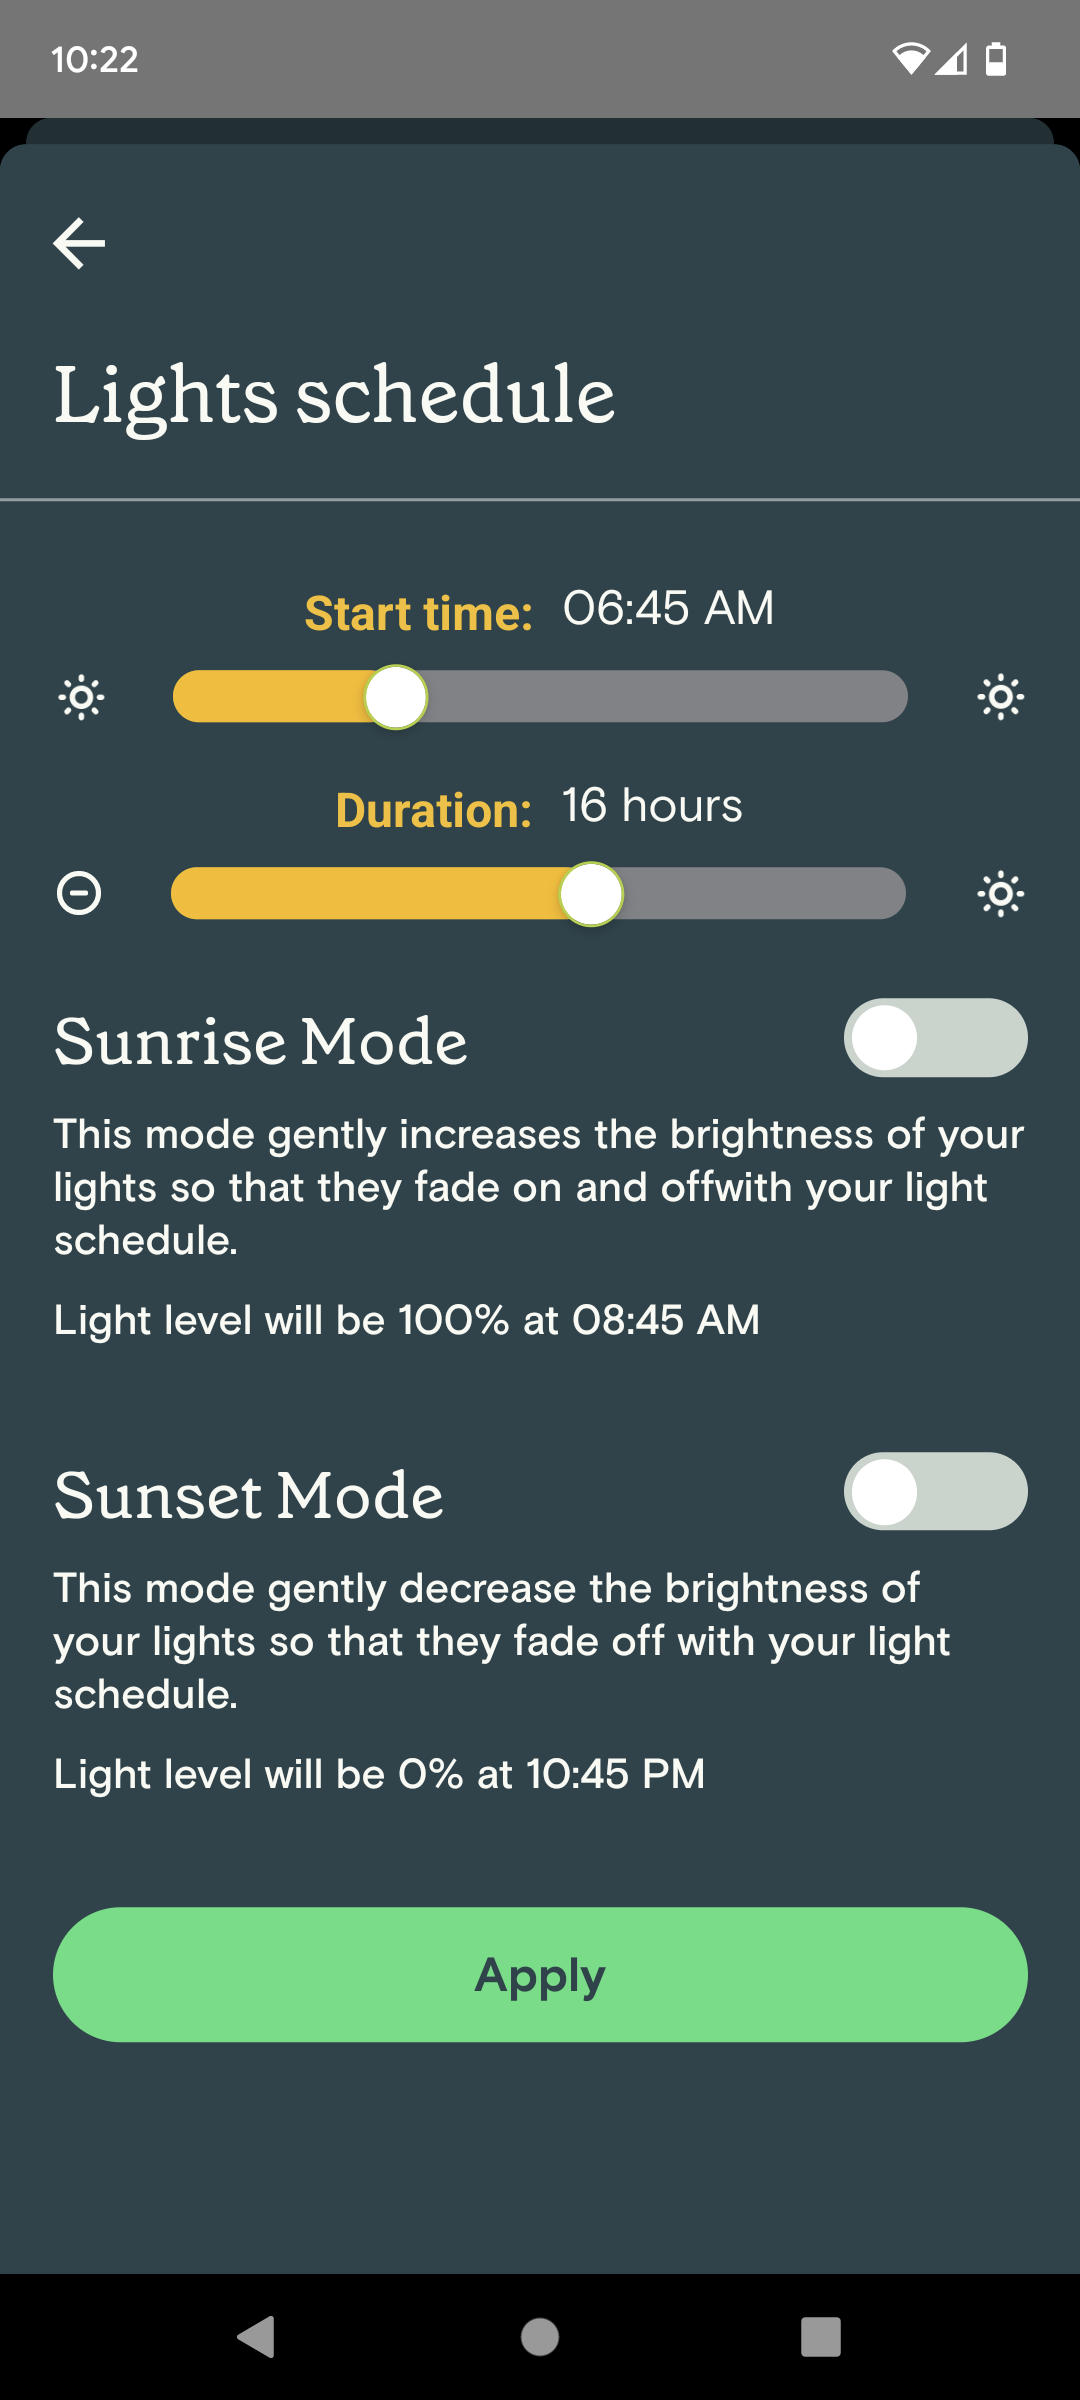 Lighting options are updated to include sunrise/sunset options